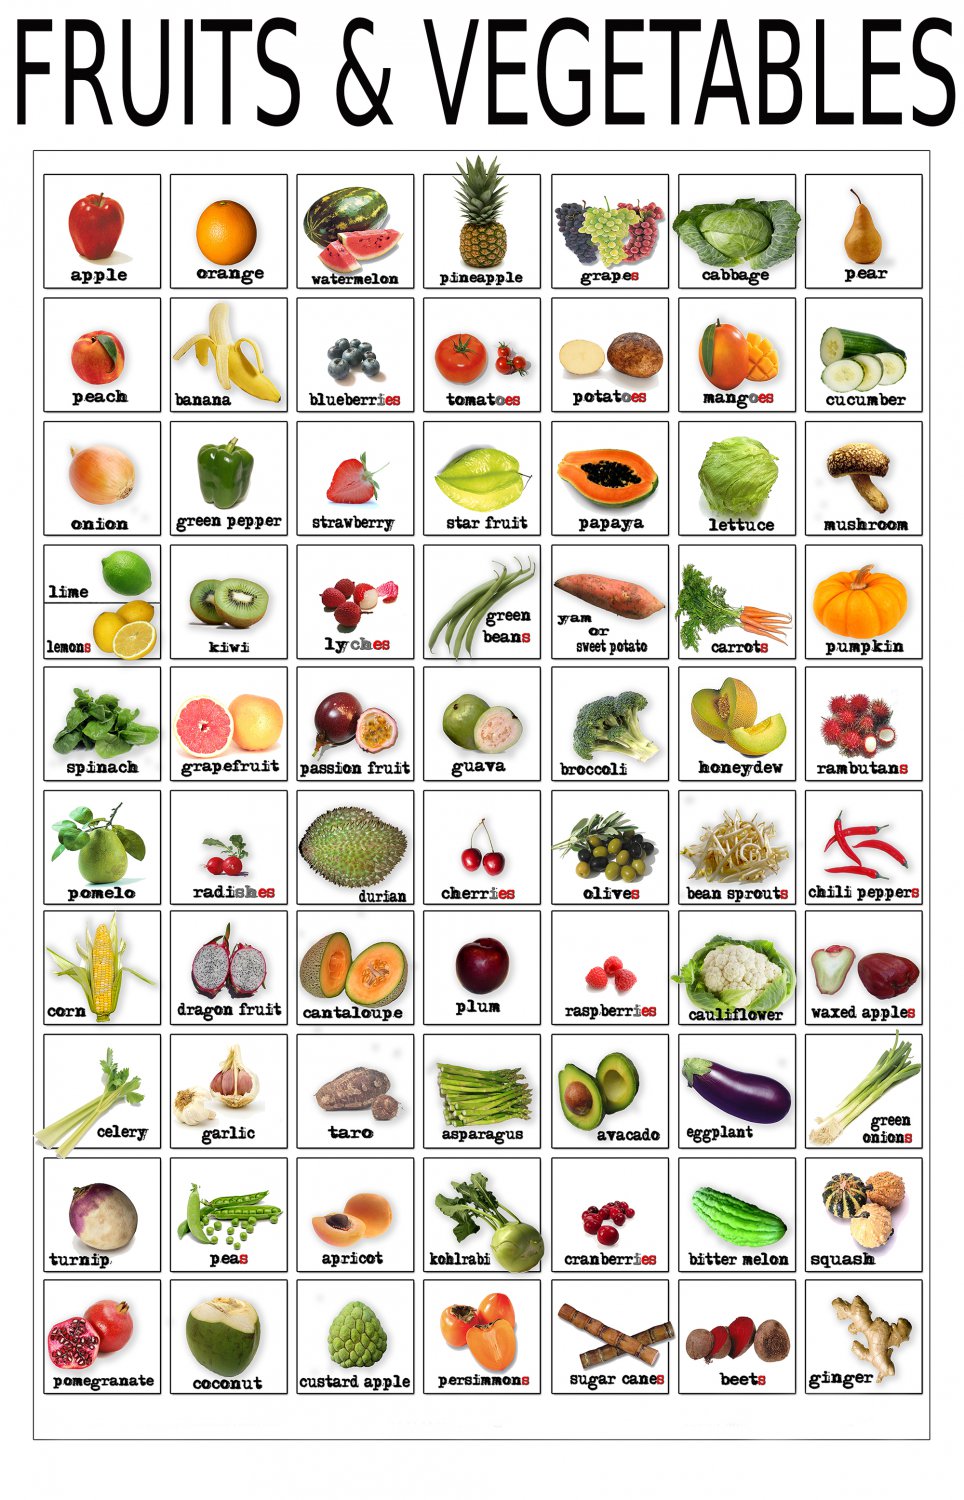 Fruits and Vegetables Infographic Chart  18"x28" (45cm/70cm) Canvas Print